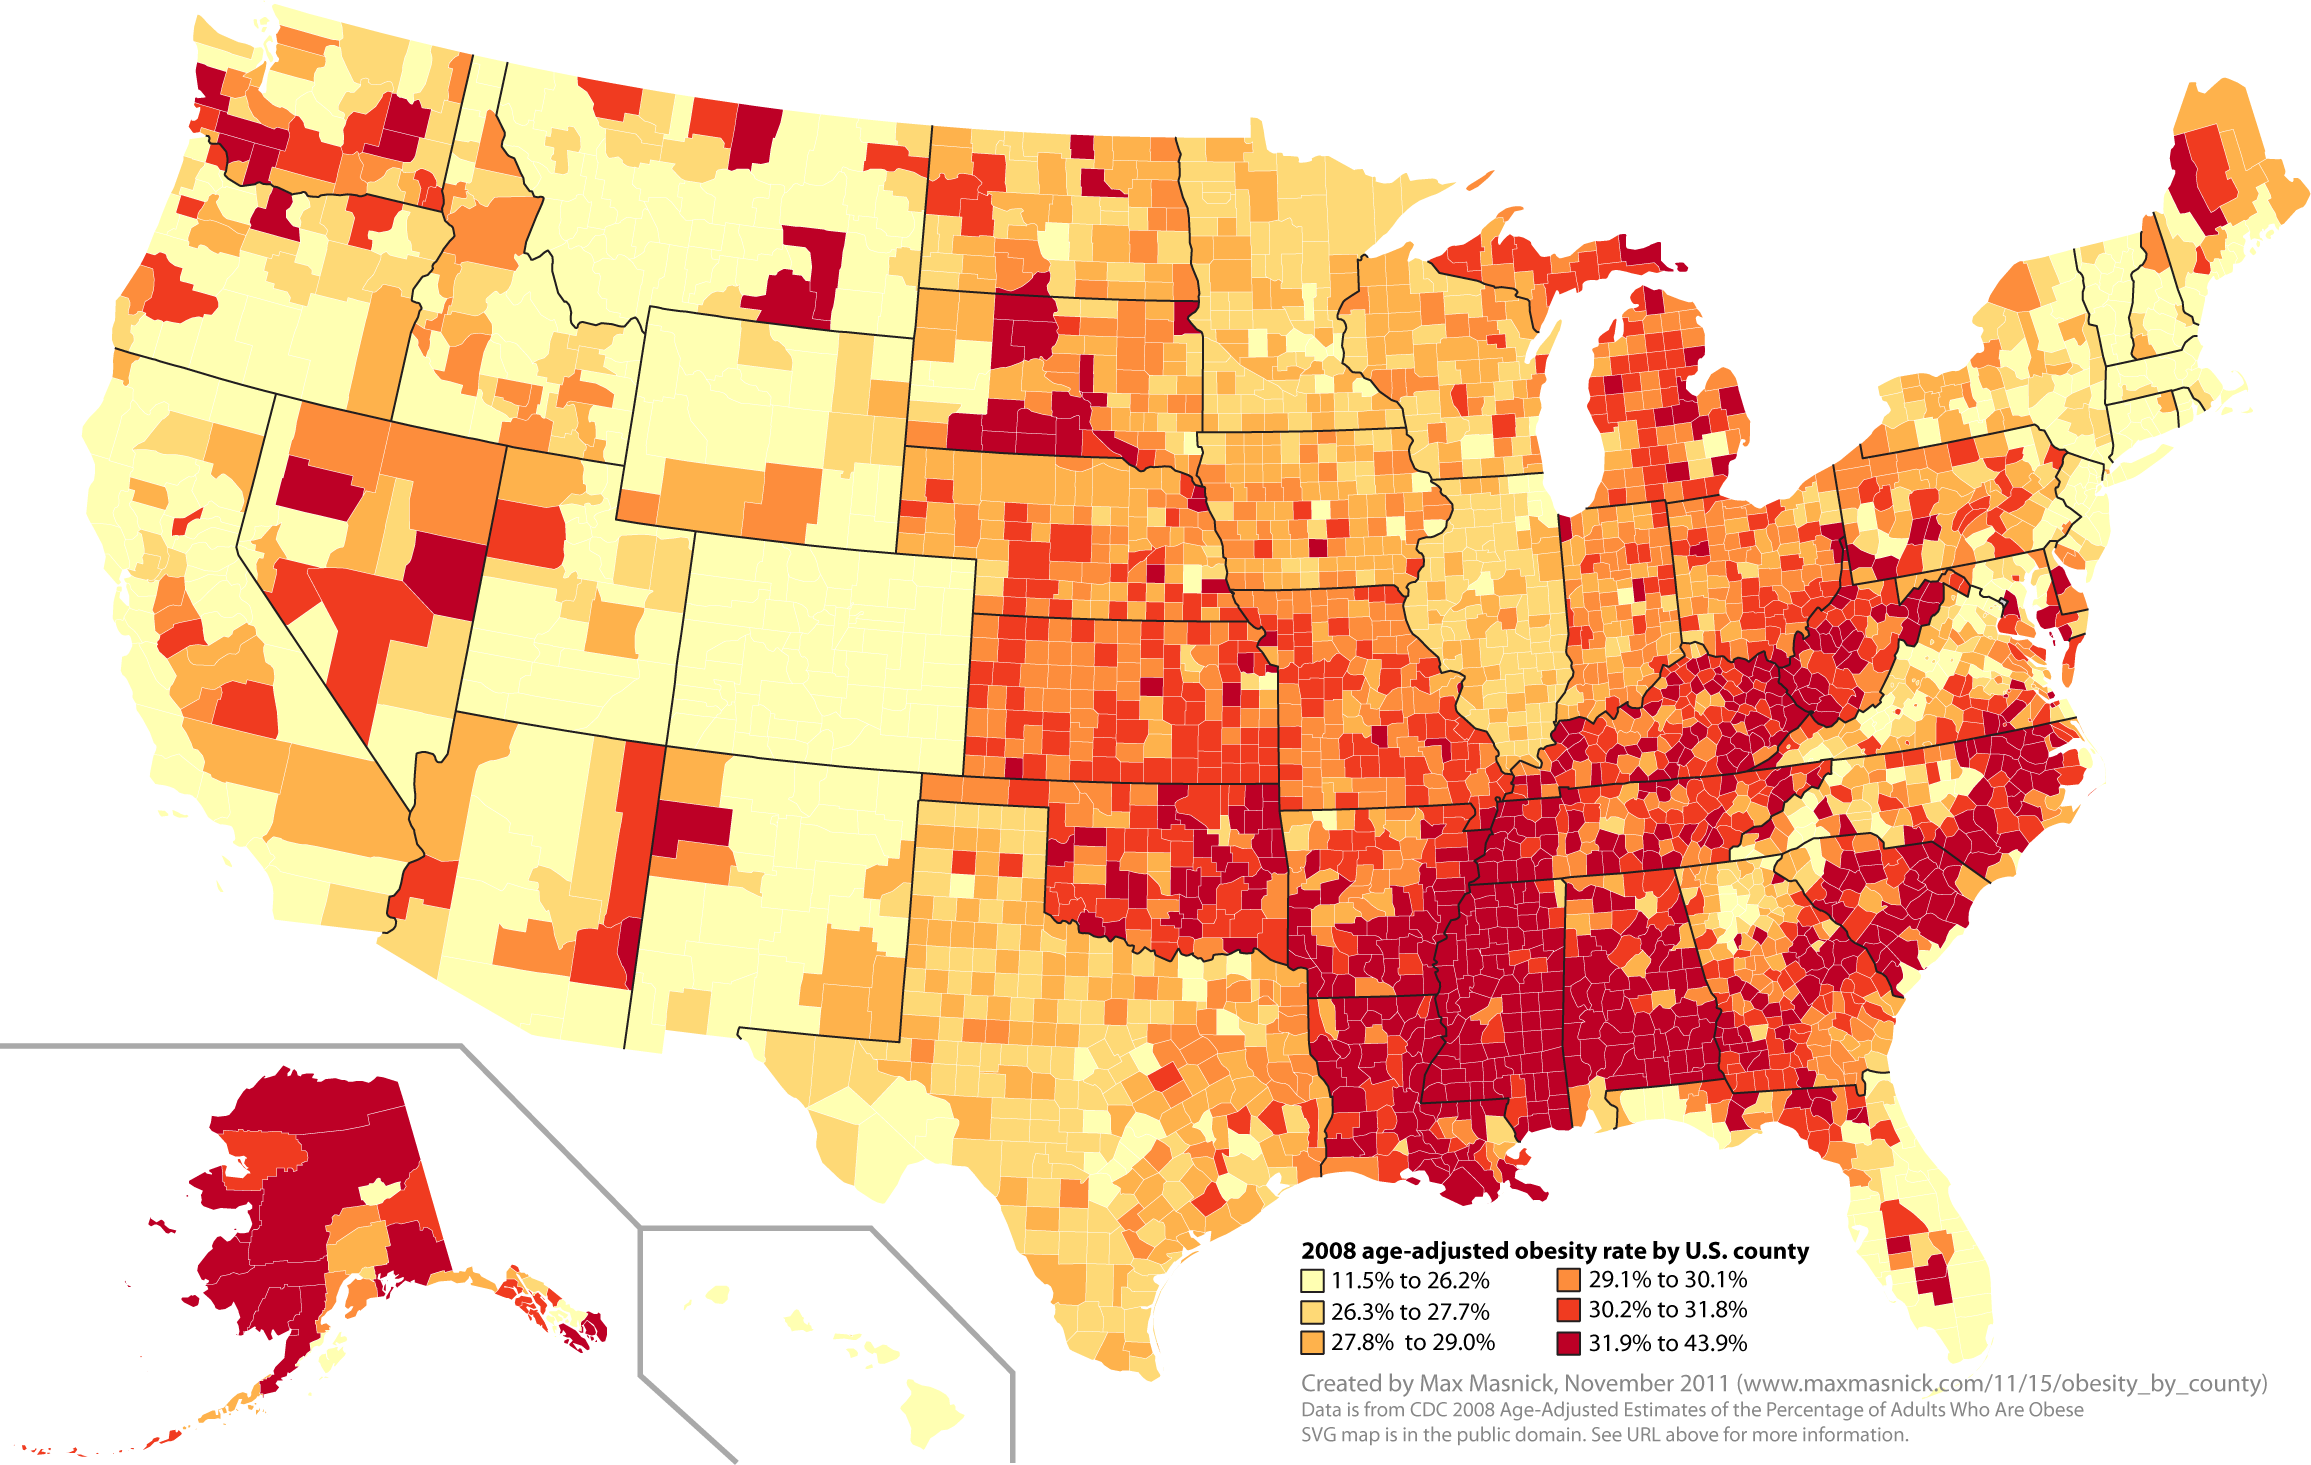 CDC heat map of overweight and obese popuations in the US with high density in southeast - especially in the midsouth. 